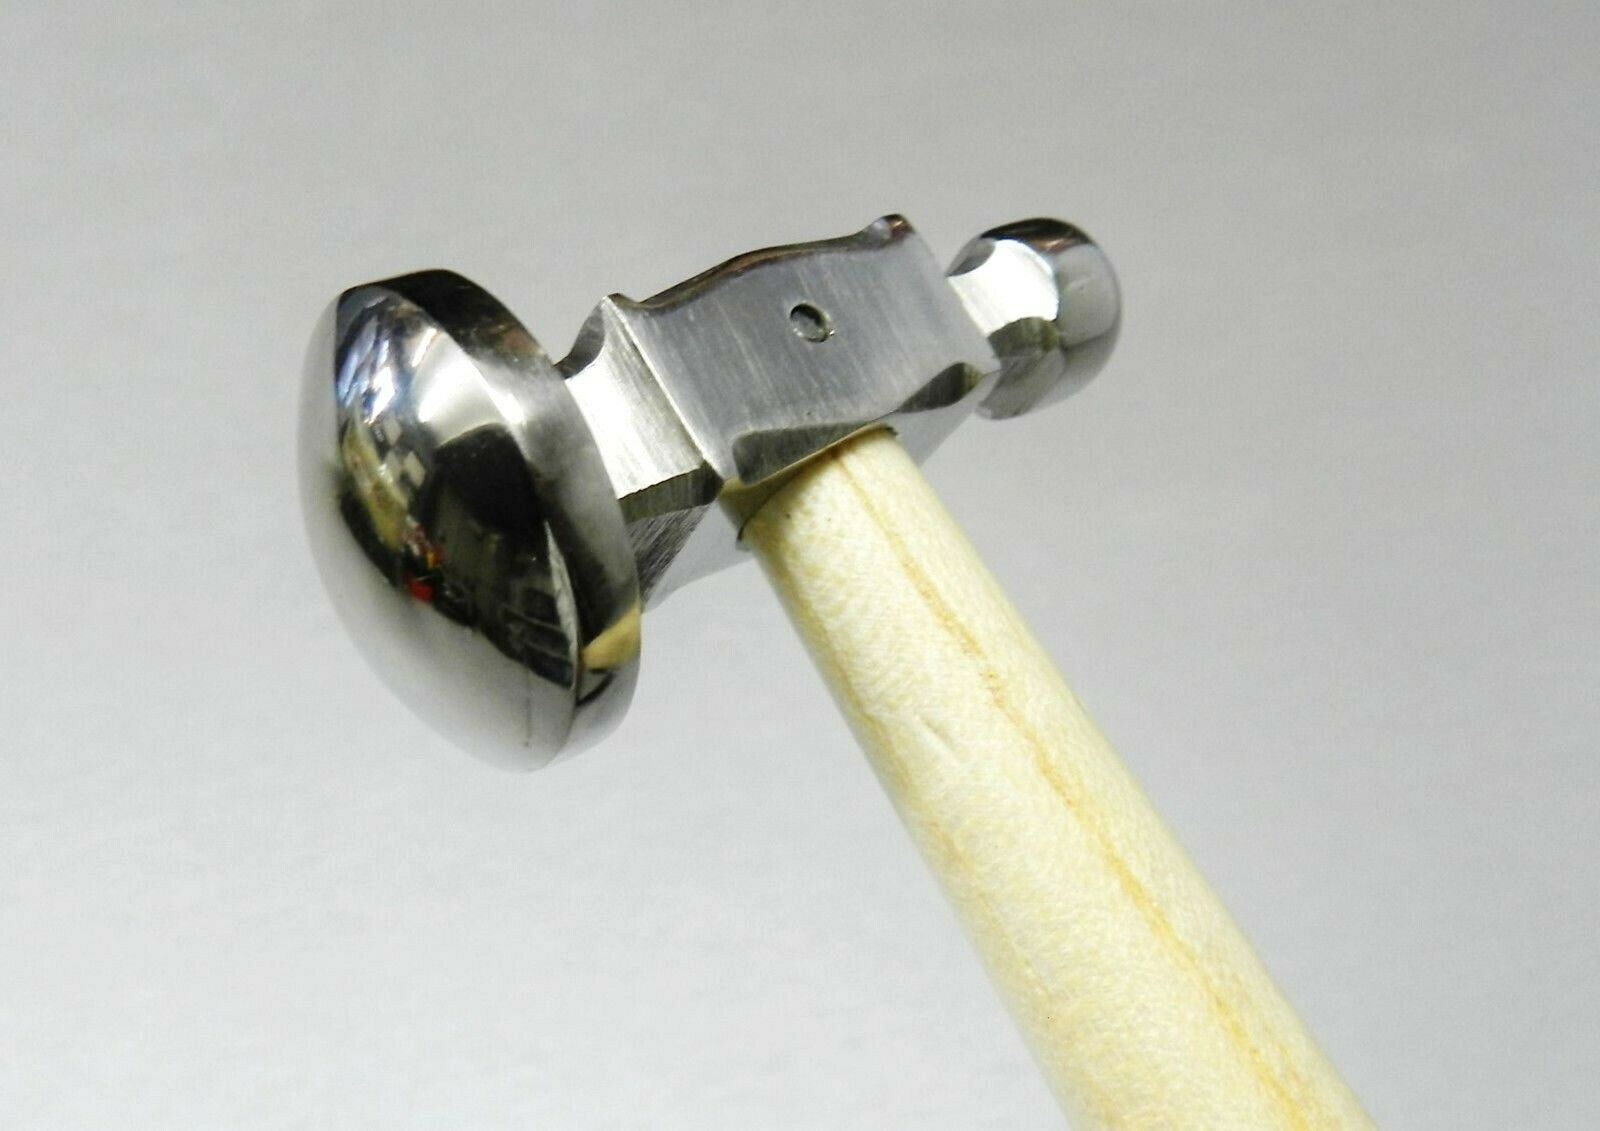 Chasing Hammer 1" Full Domed Face Jewelry Crafts Metal Forming Jewelers Hammer